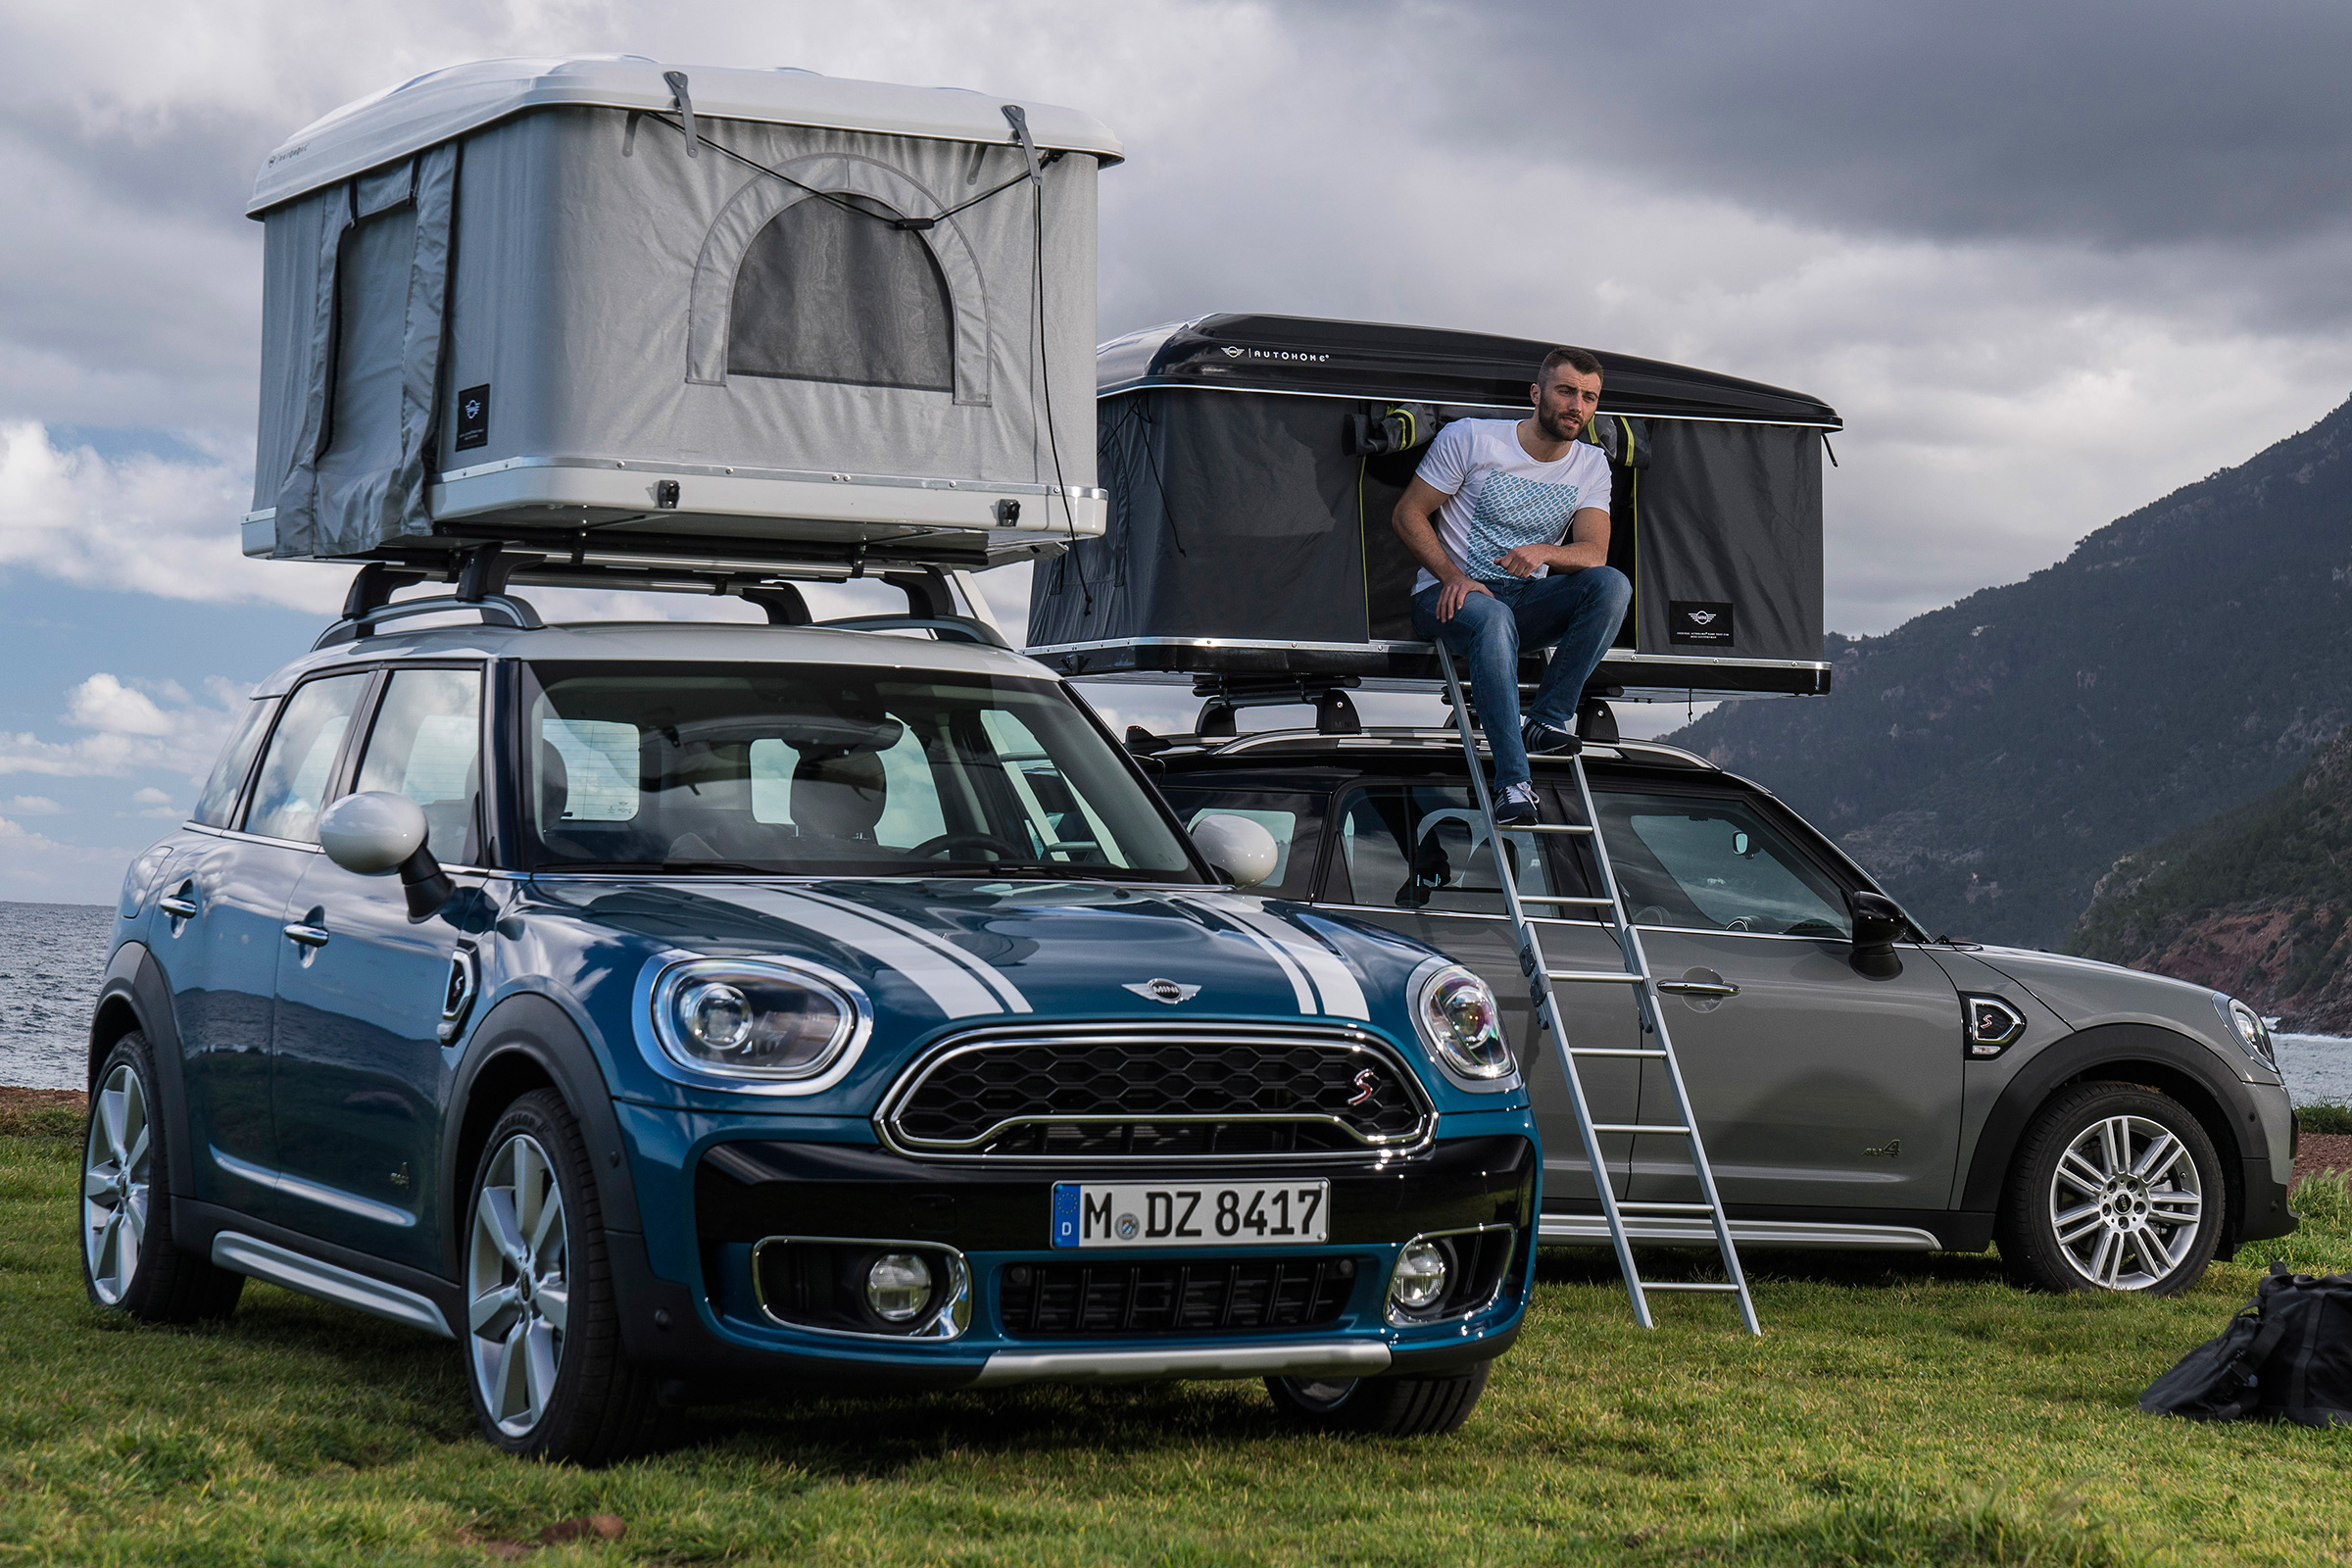 You can now buy a £2,400 roof tent for your MINI Countryman | Auto Express